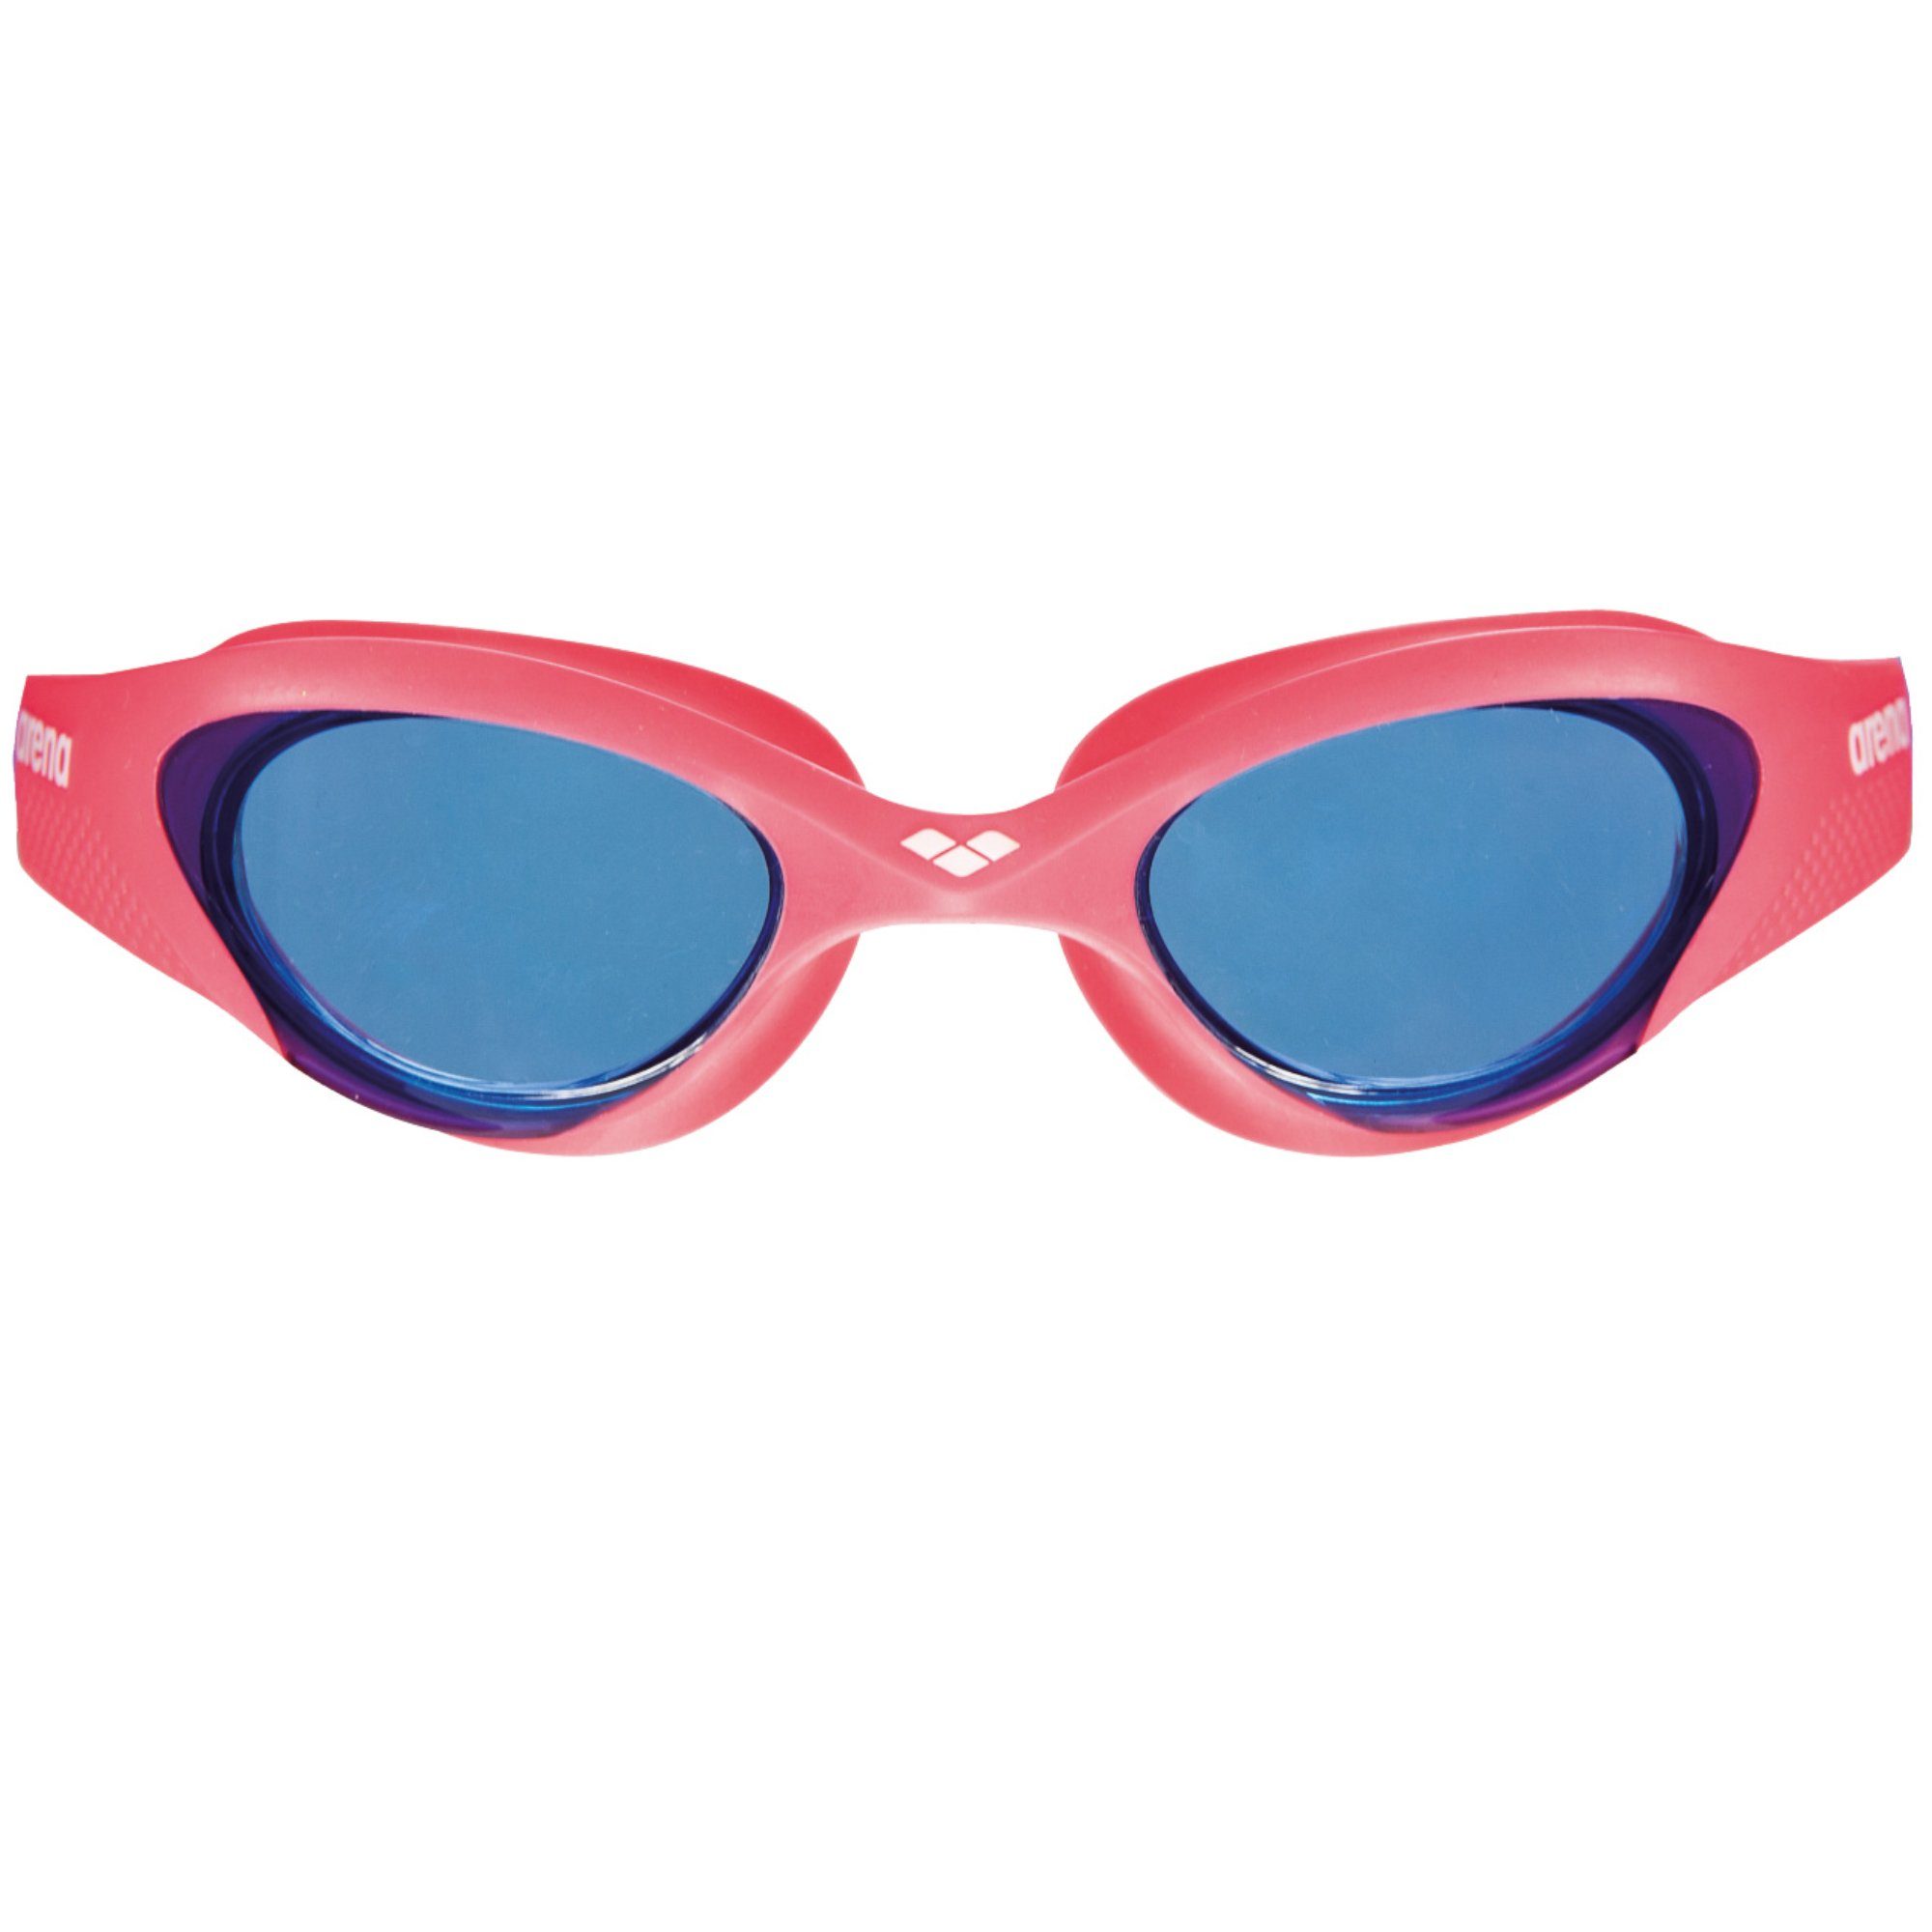 light Junior The blue-red-blue Schwimmbrille Arena One arena